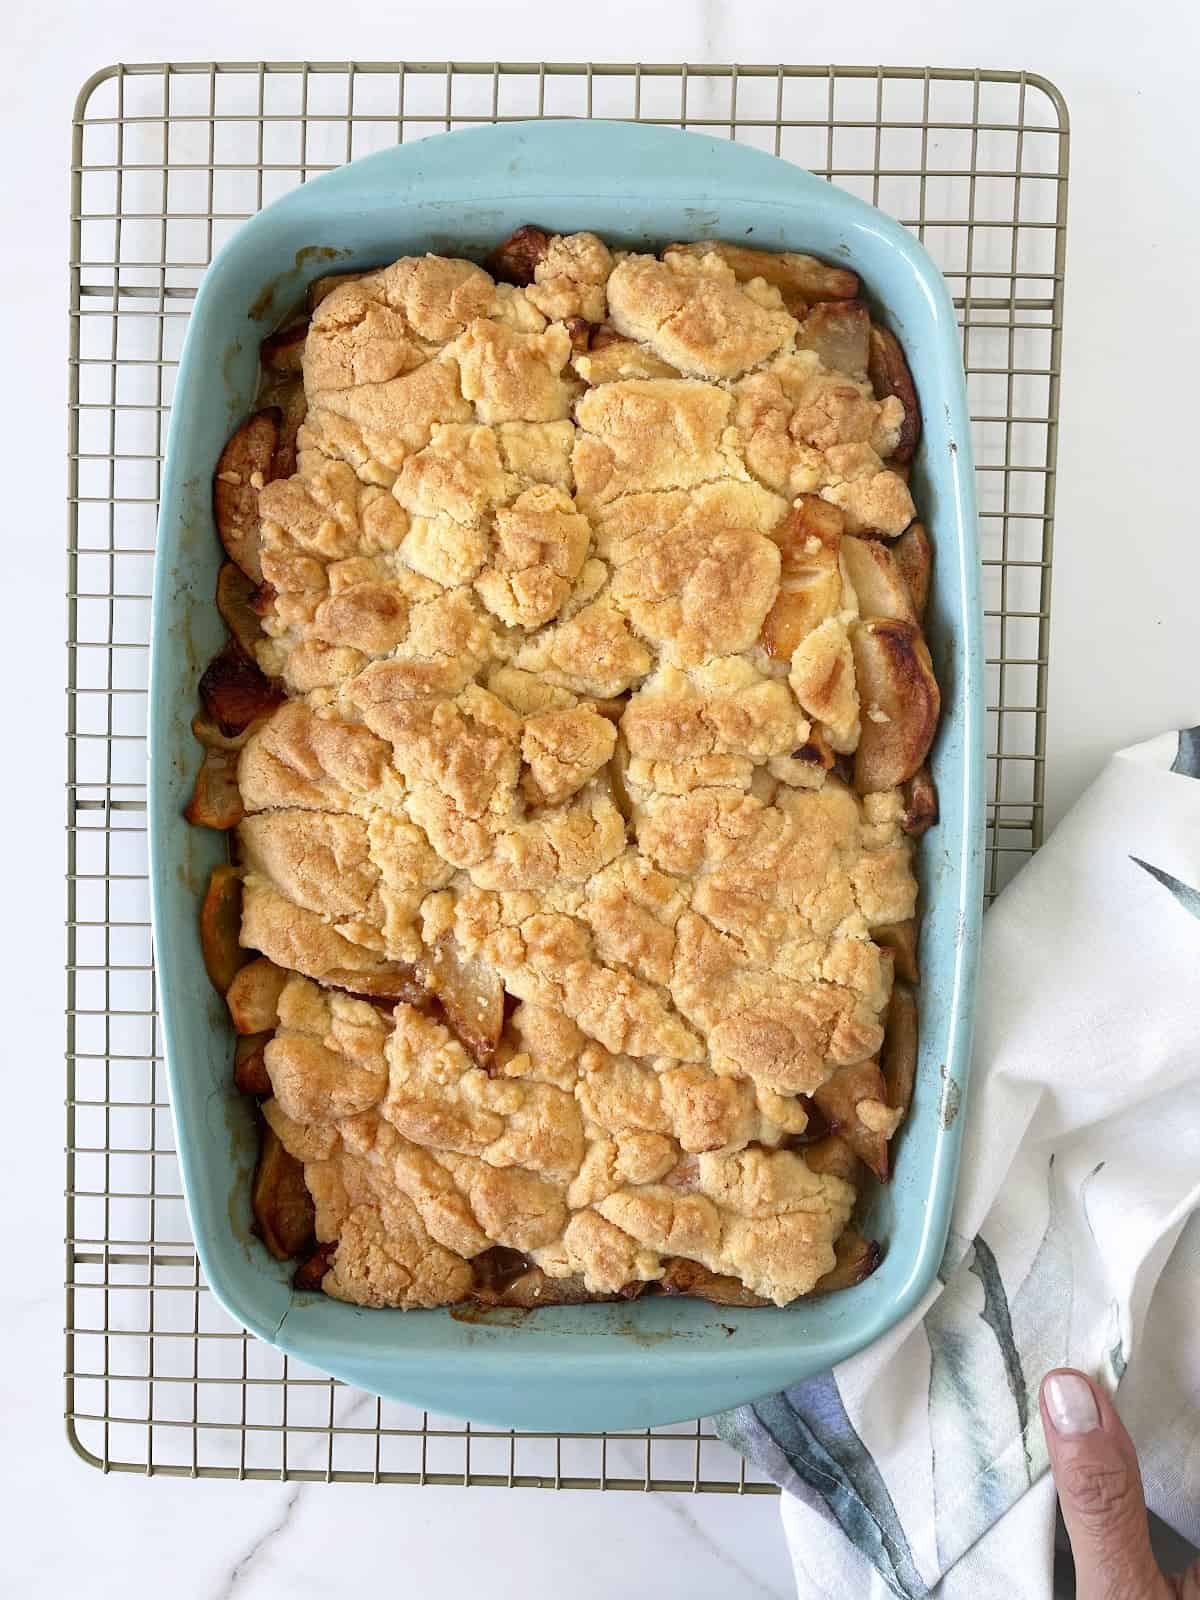 Baked apple dump cake in a blue dish on a wire rack. A kitchen towel. White marble surface.